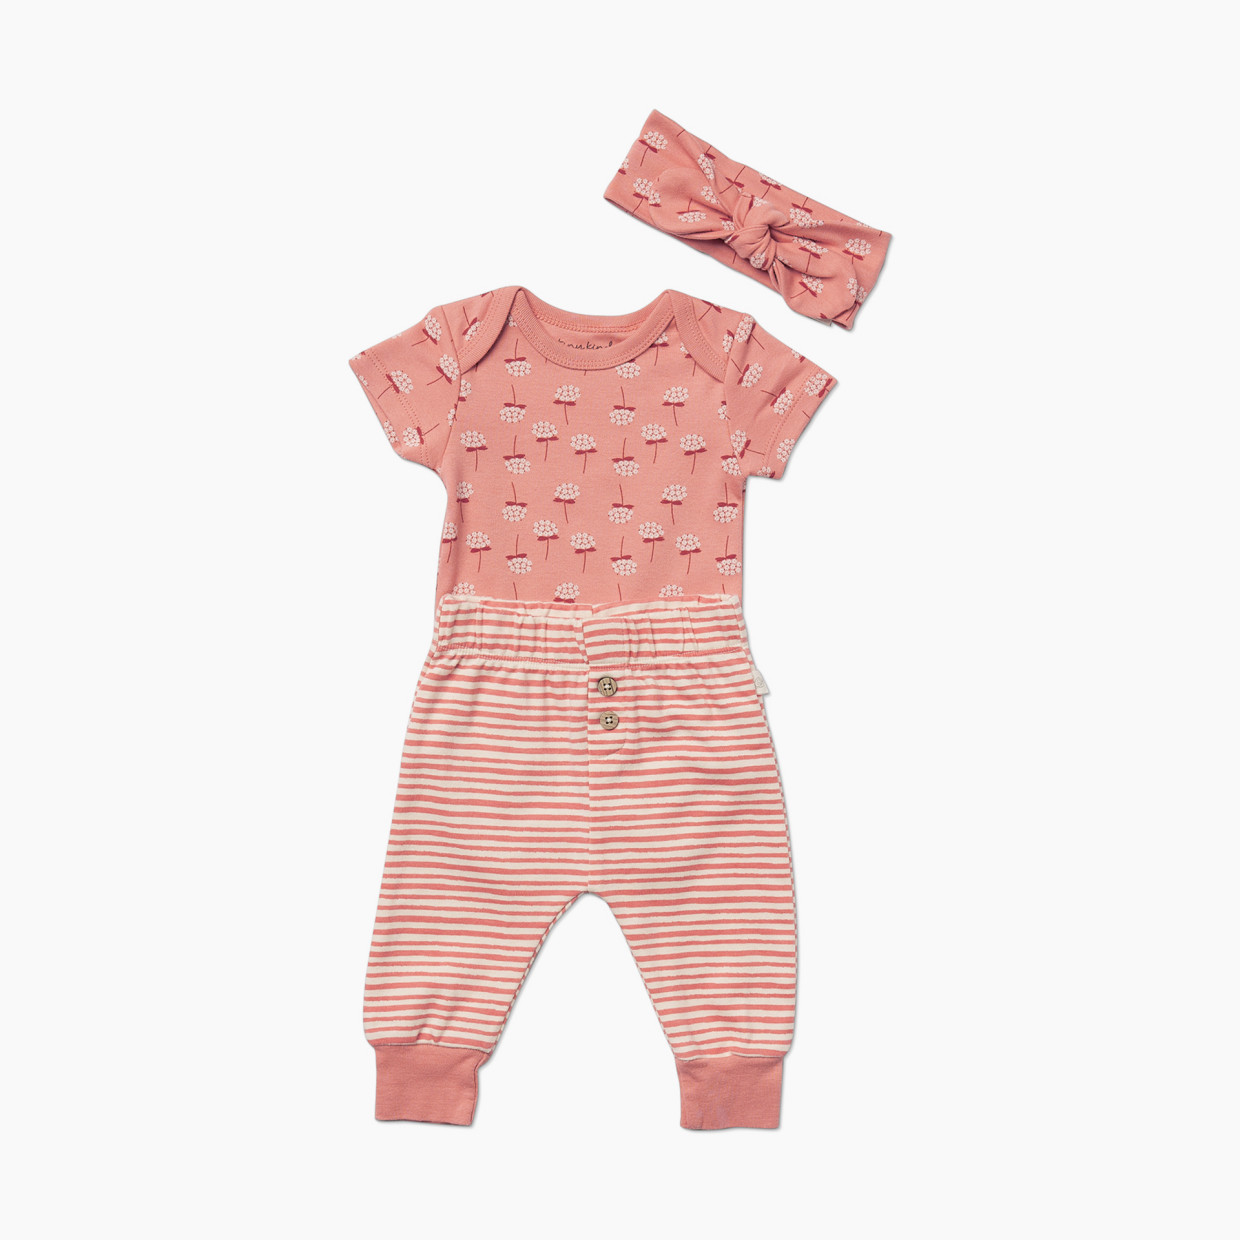 Tiny Kind The Outfit 3 Piece Set - Floral Bunch, 3-6 M.